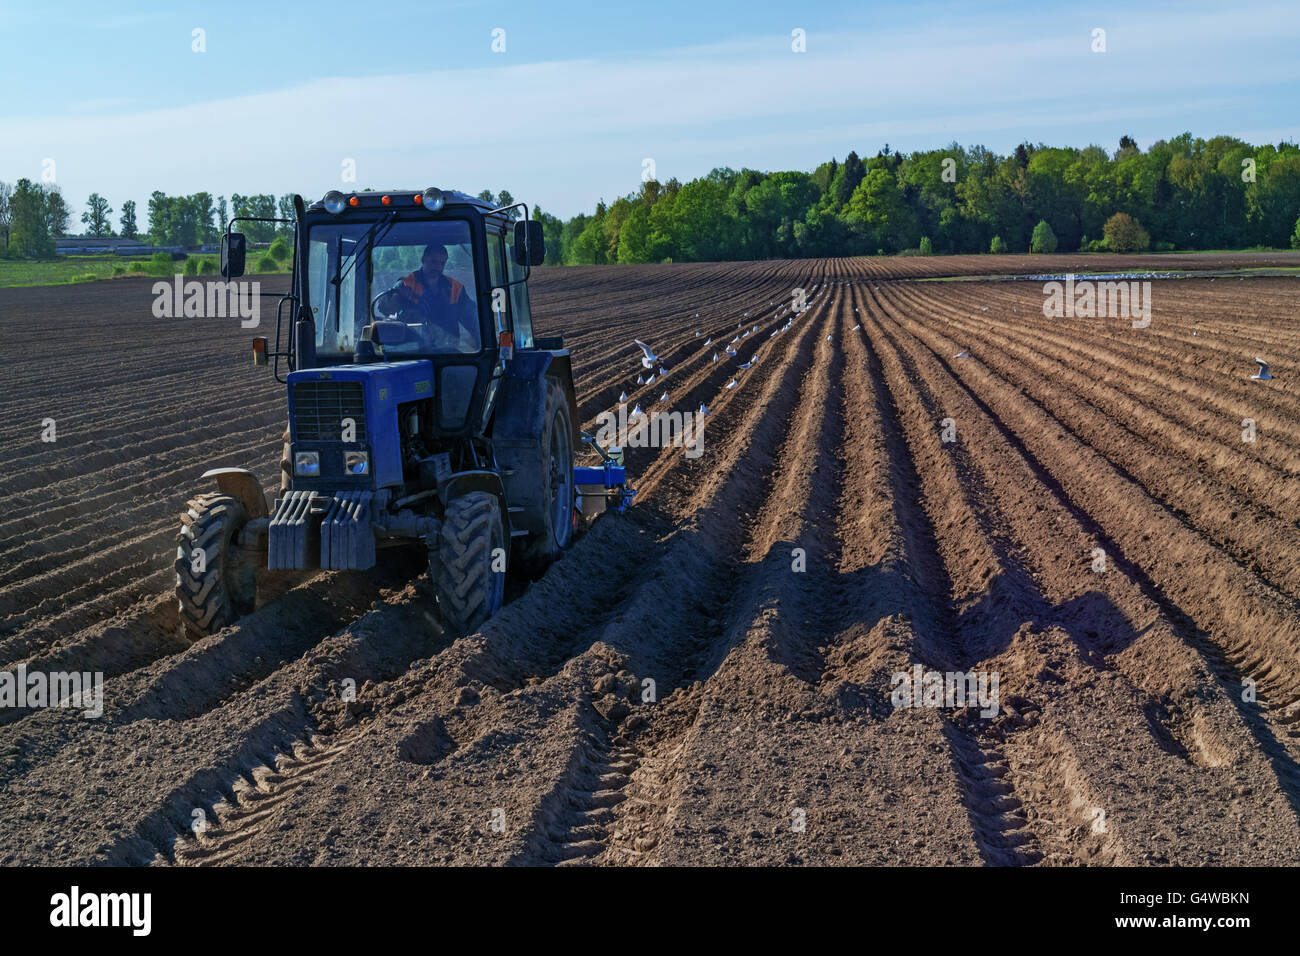 The peasant works at an agricultural field at tractor.Tractor with a seeder with escort white birds. Stock Photo